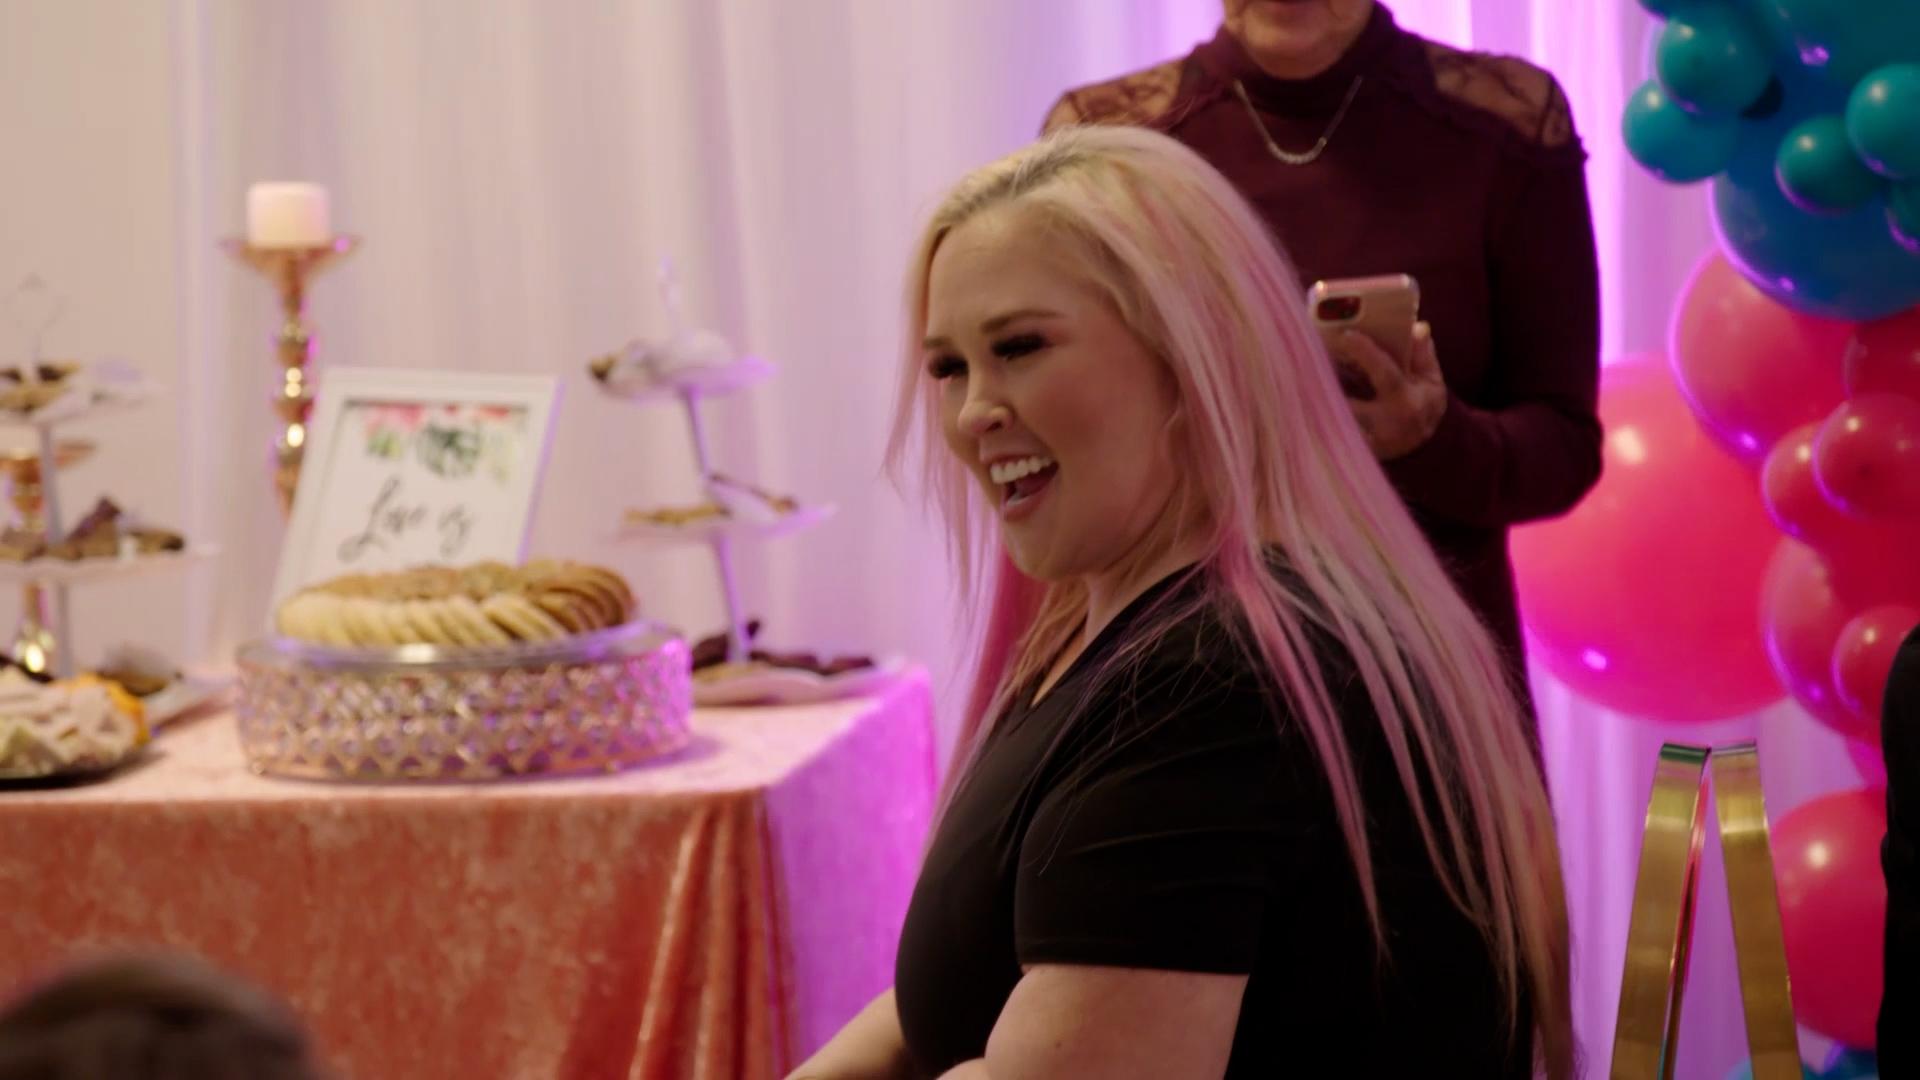 Watch Sneak Peek: Surprise Guest at June's Bridal Shower! | Mama June: From Not to Hot Video Extras